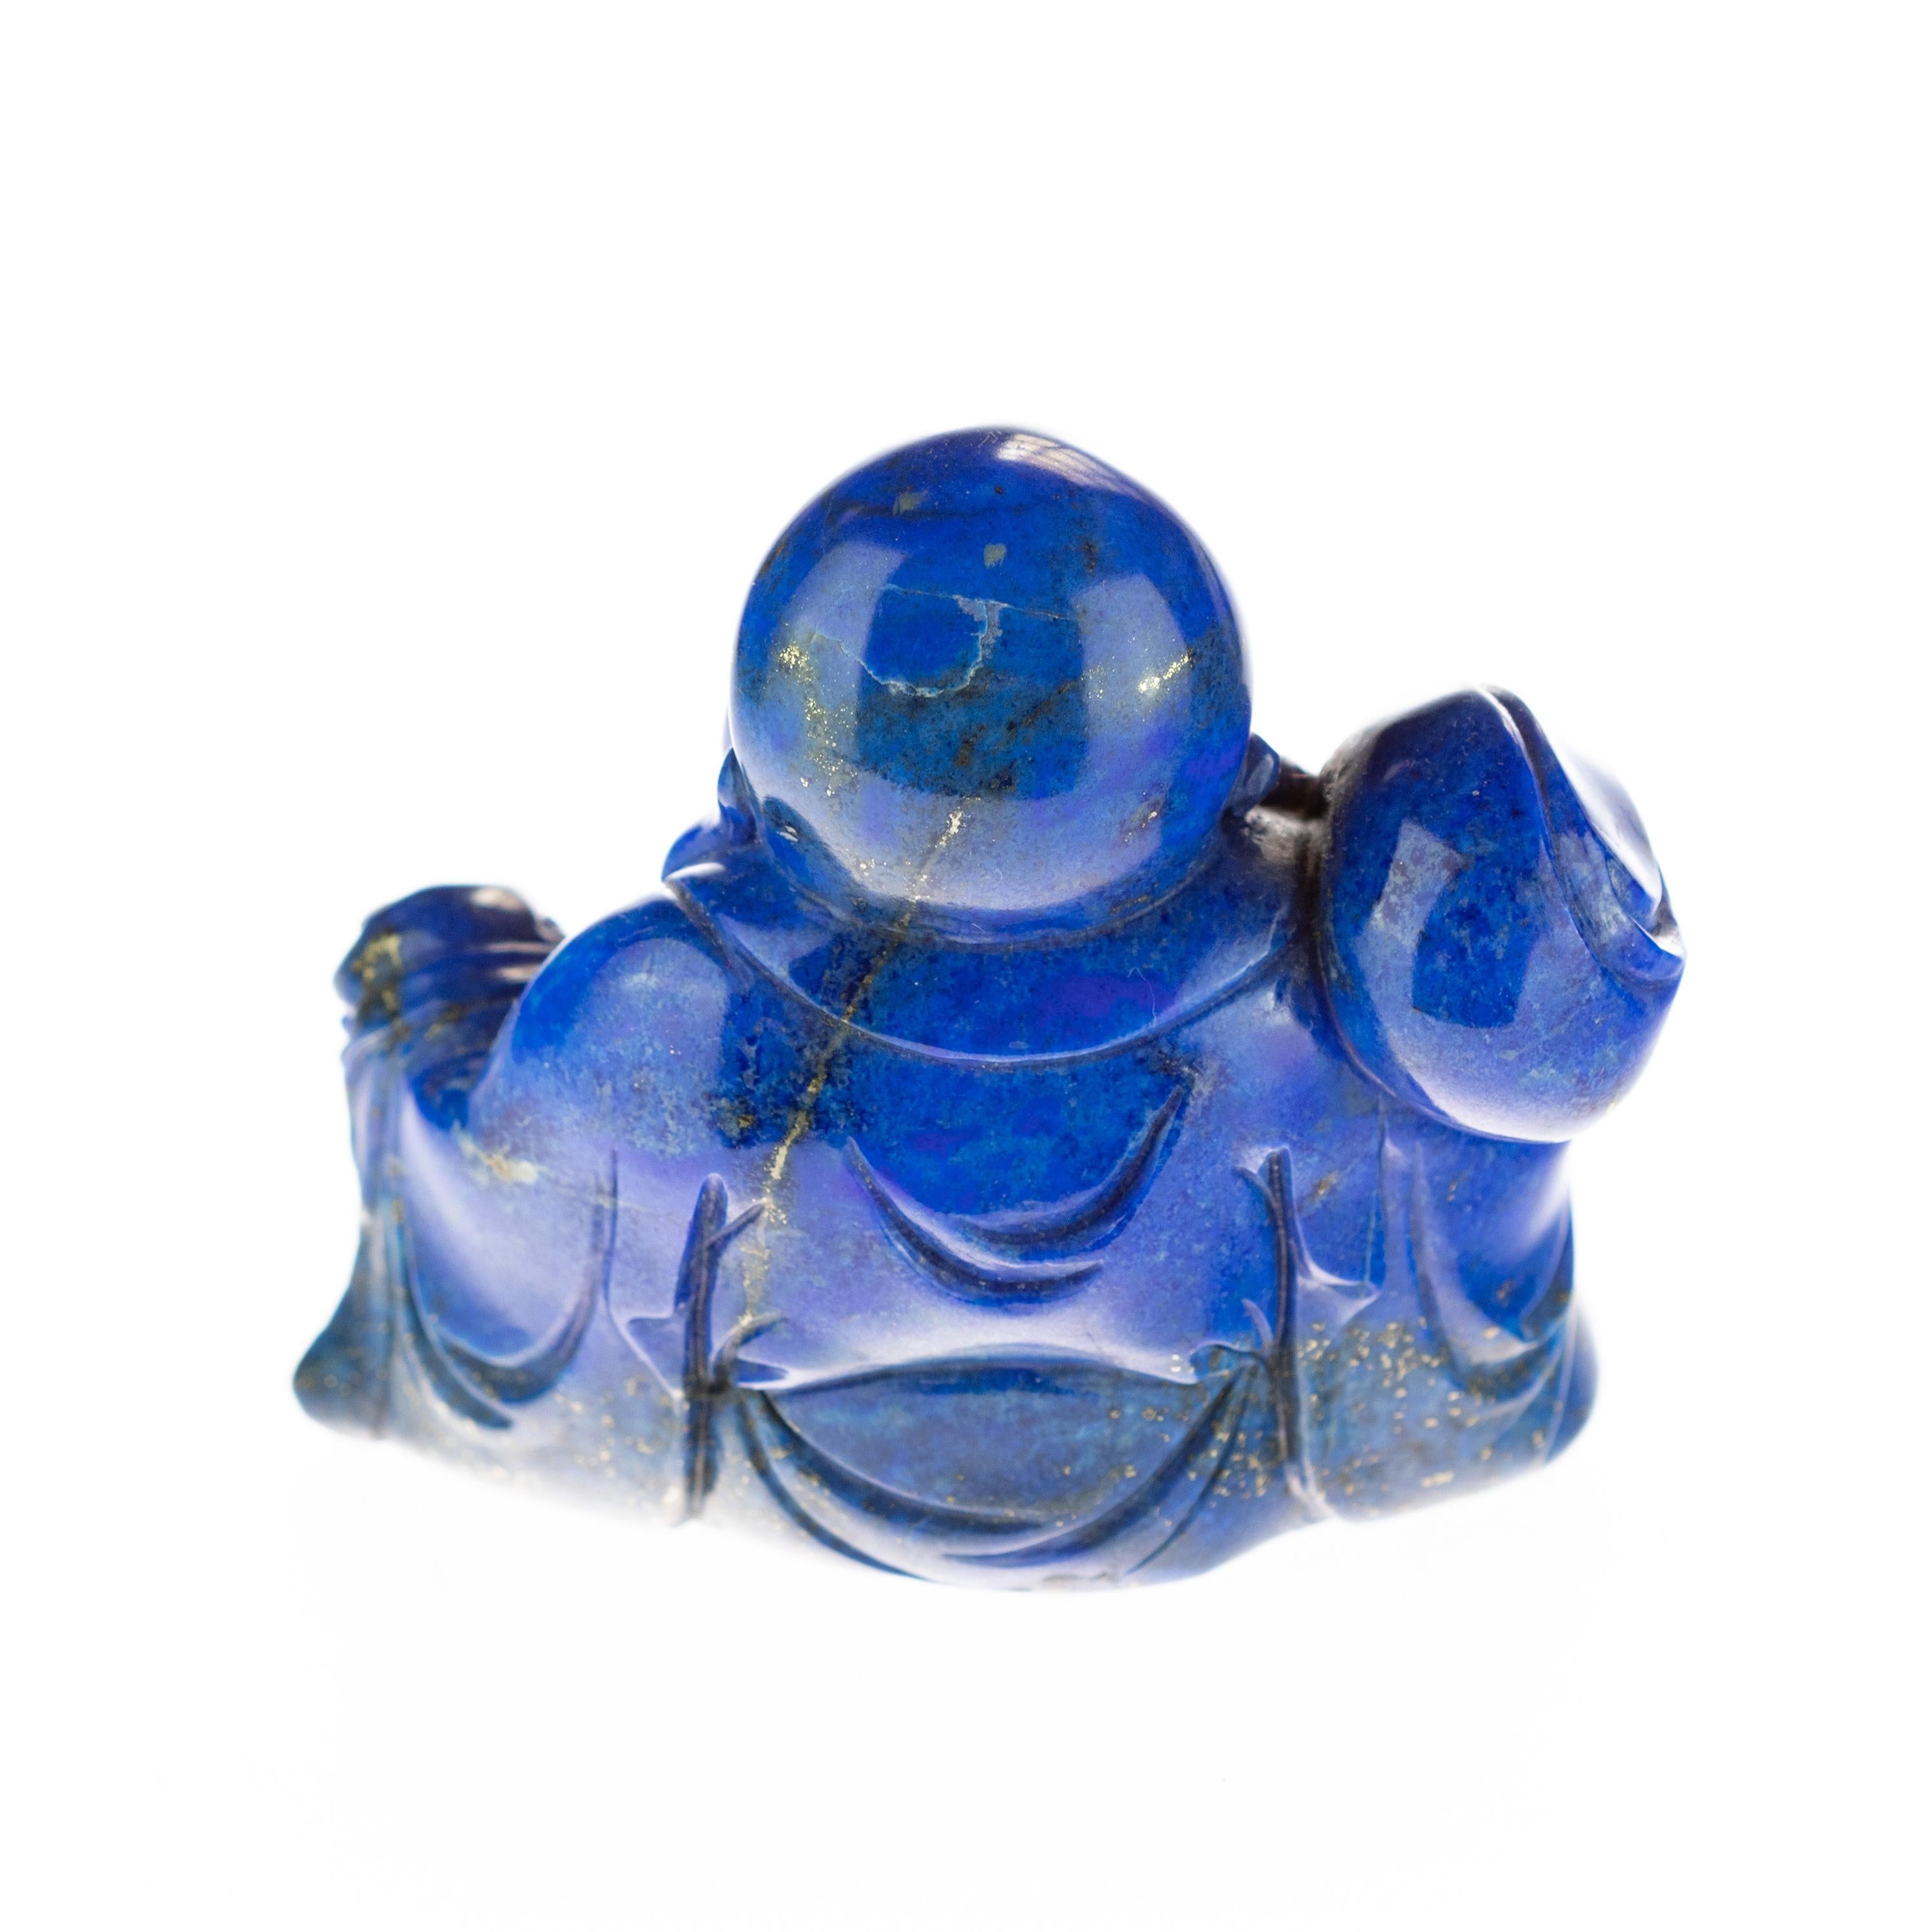 Chinese Export Lapis Lazuli Meditation Buddha Carved Gemstone Asian Art Statue Sculpture For Sale